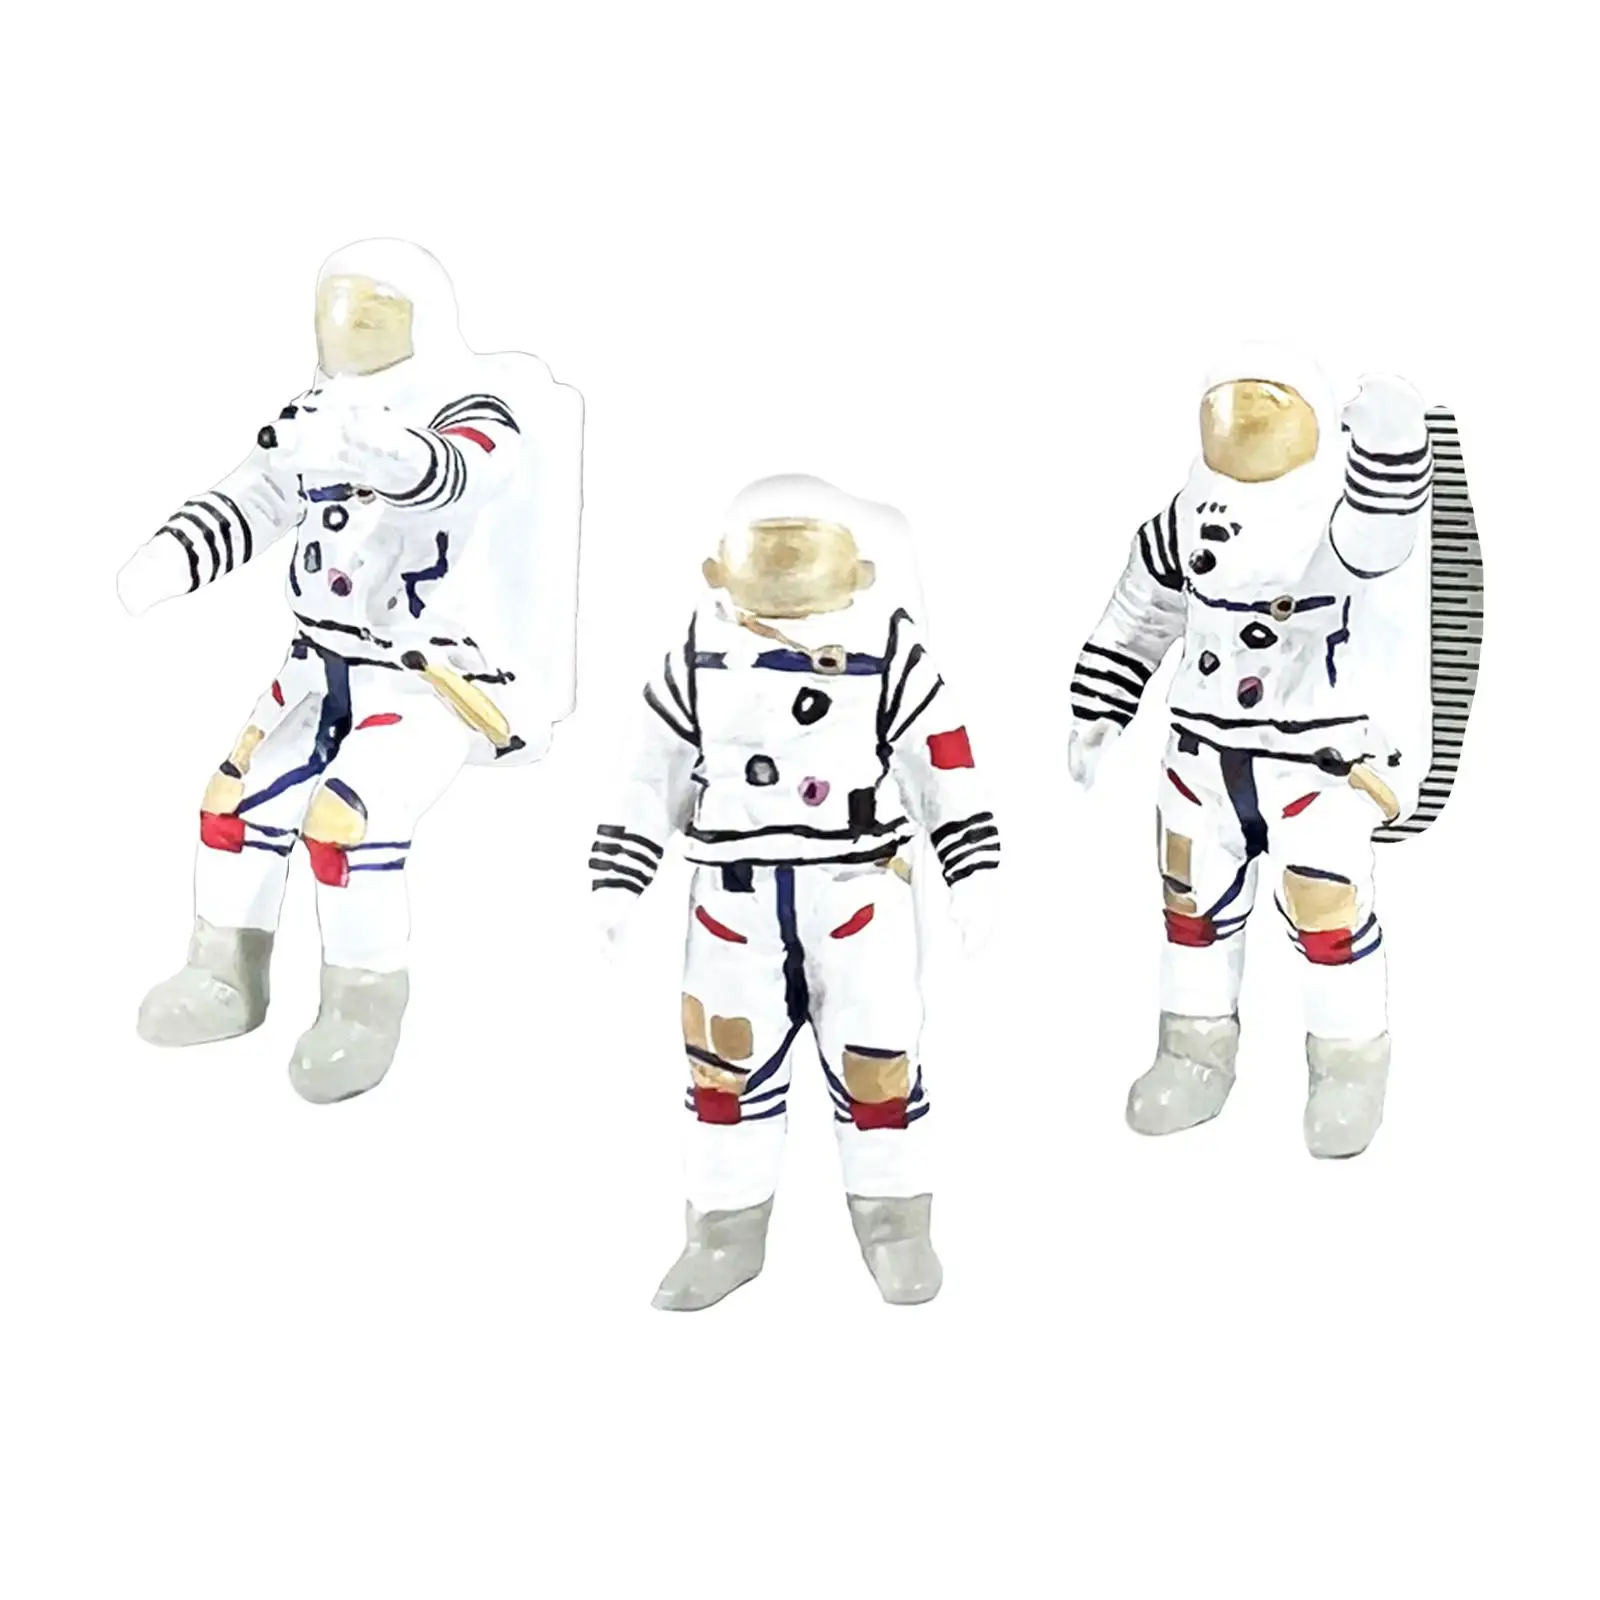 1/64 Astronaut Figurines Miniature Astronaut Action Figure Collectibles Arts and Crafts Spaceman Model for Dollhouse Decor